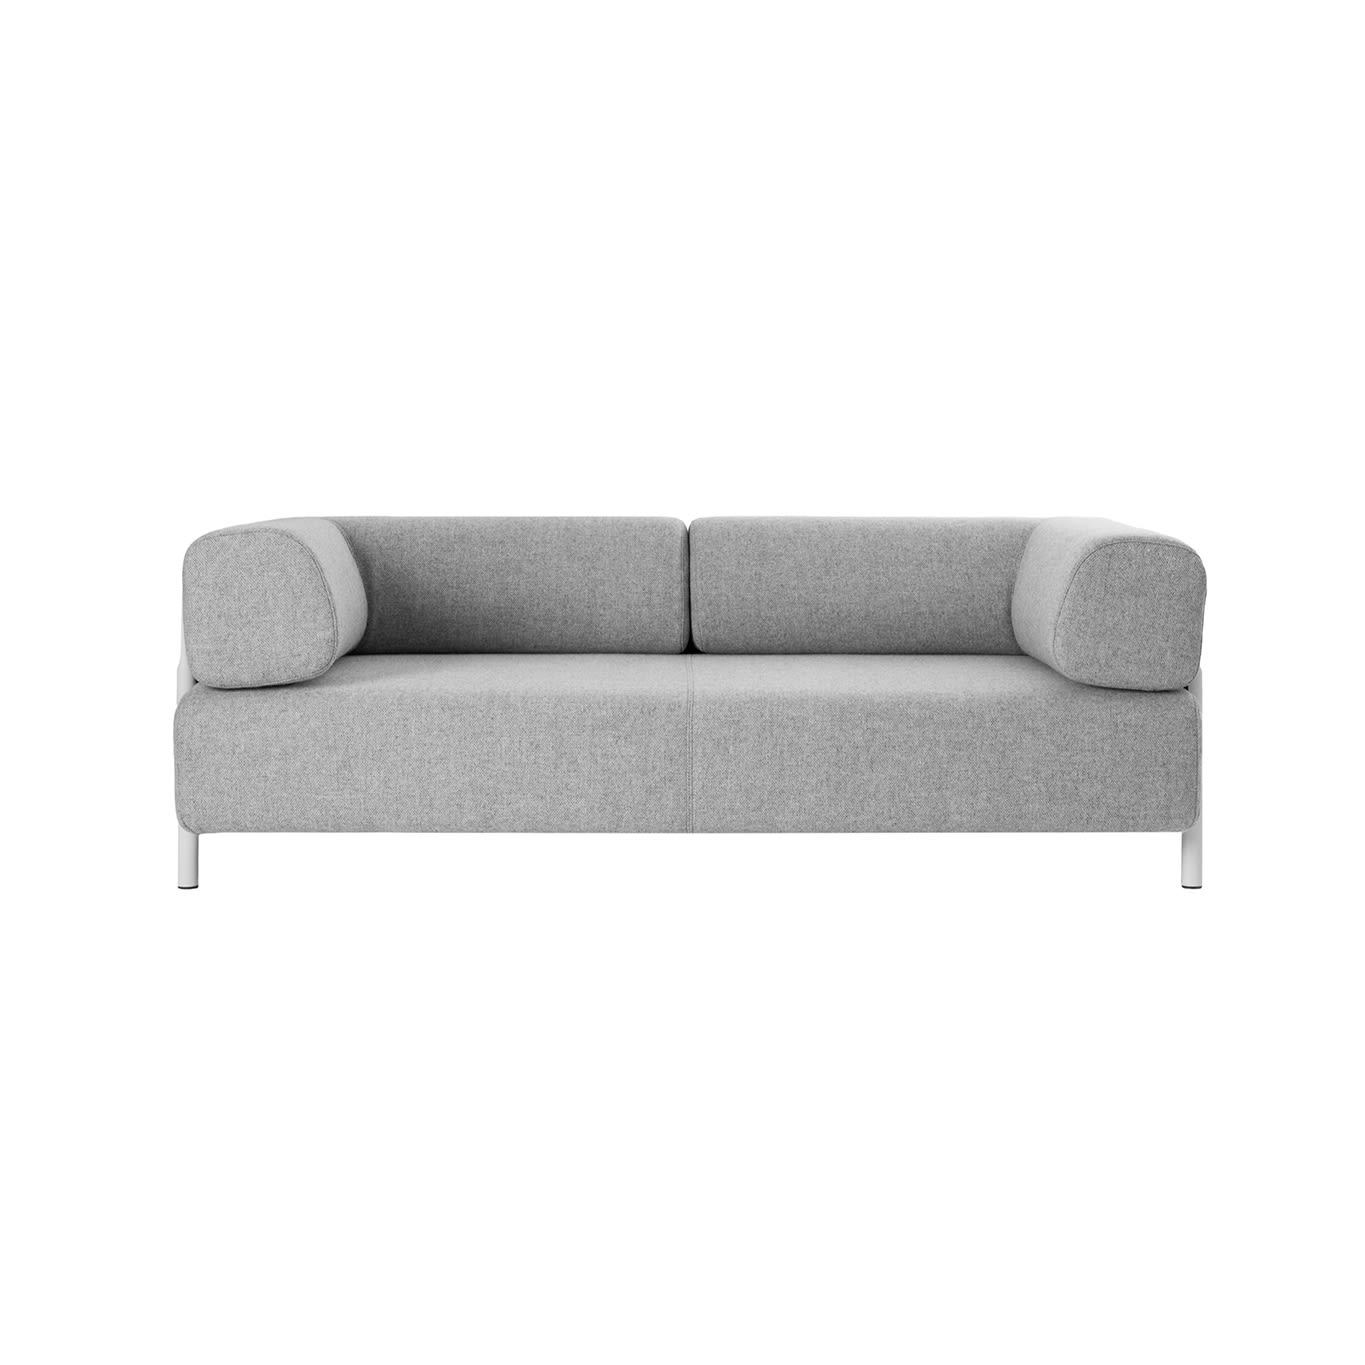 2-seater Sofa with Armrests, Grey